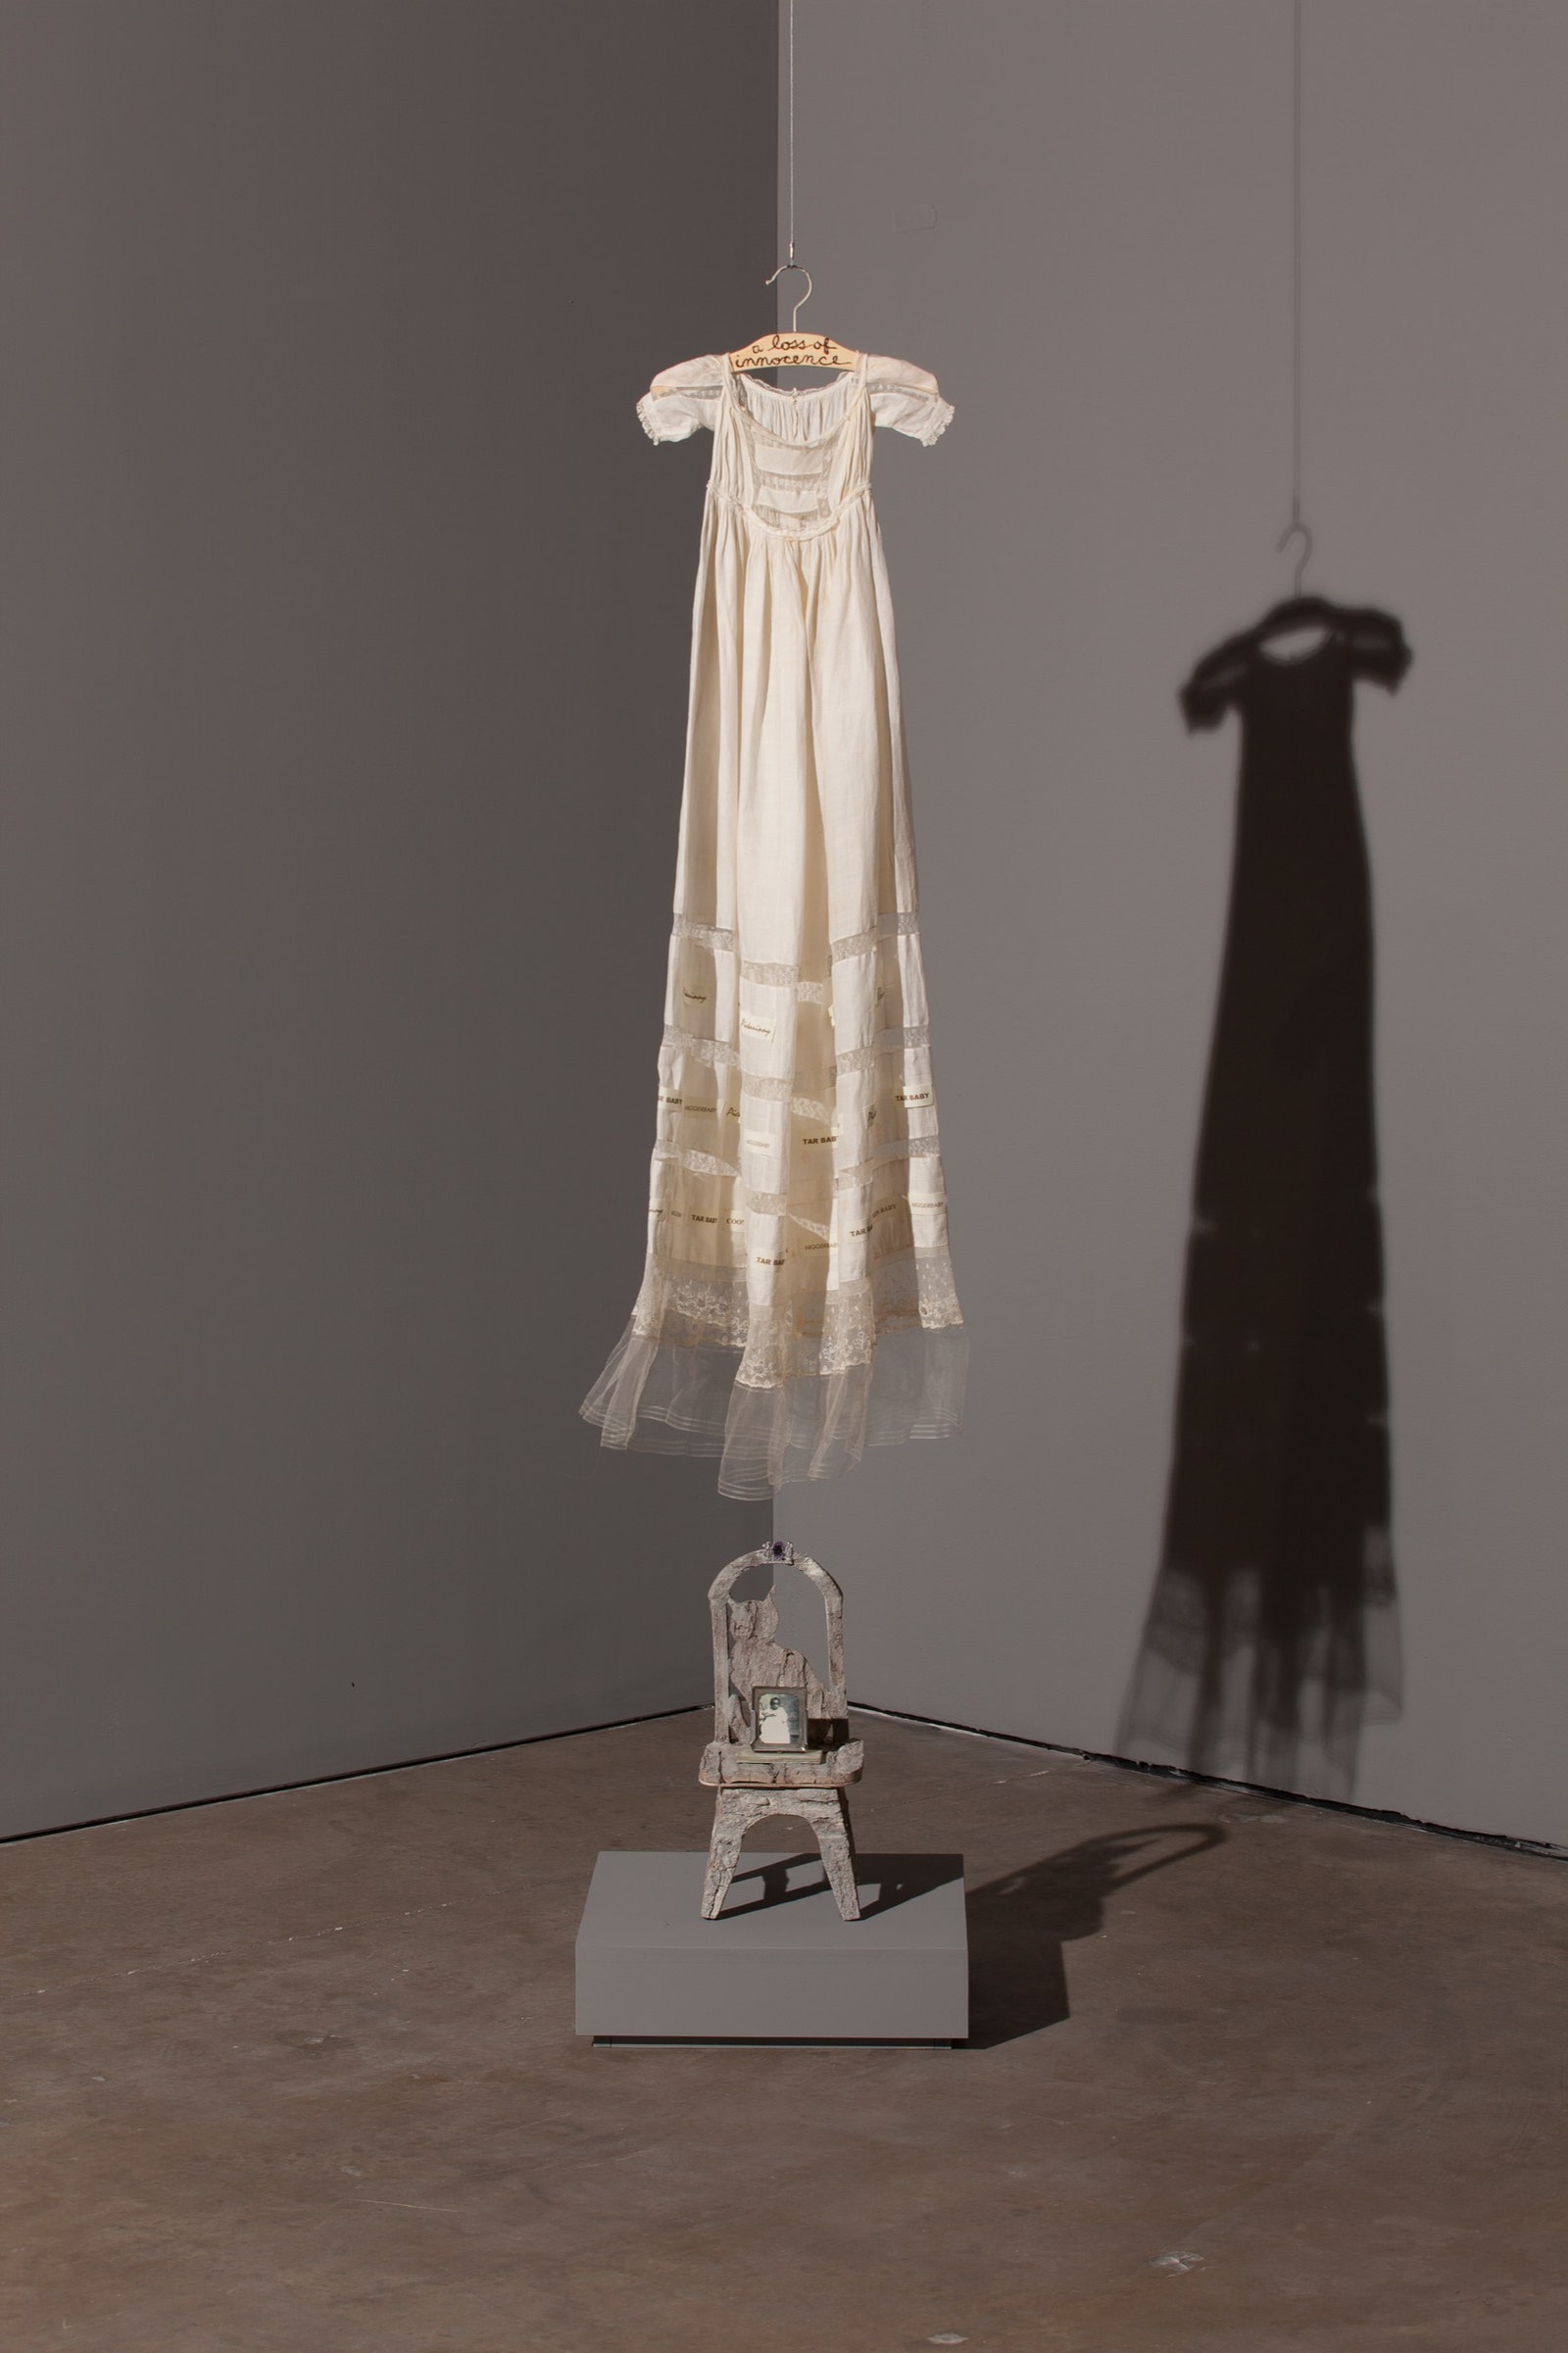 A photograph of an art piece by Betye Saar. The picture depicts a white dress on a hanger above a miniature chair...